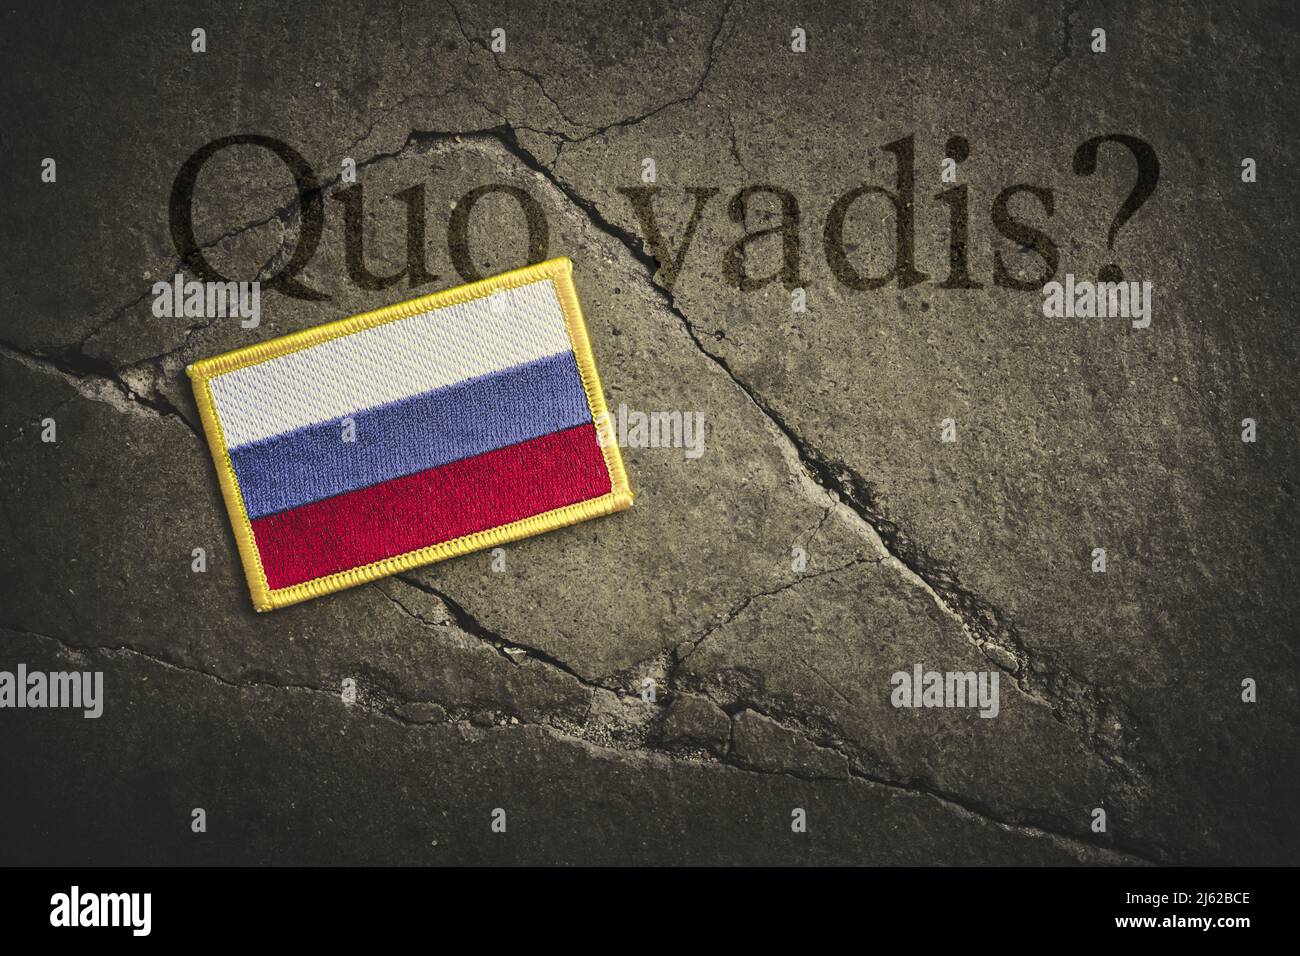 Quo Vadis Is Written Above The Flag Of Russia On Broken Ground Stock Photo